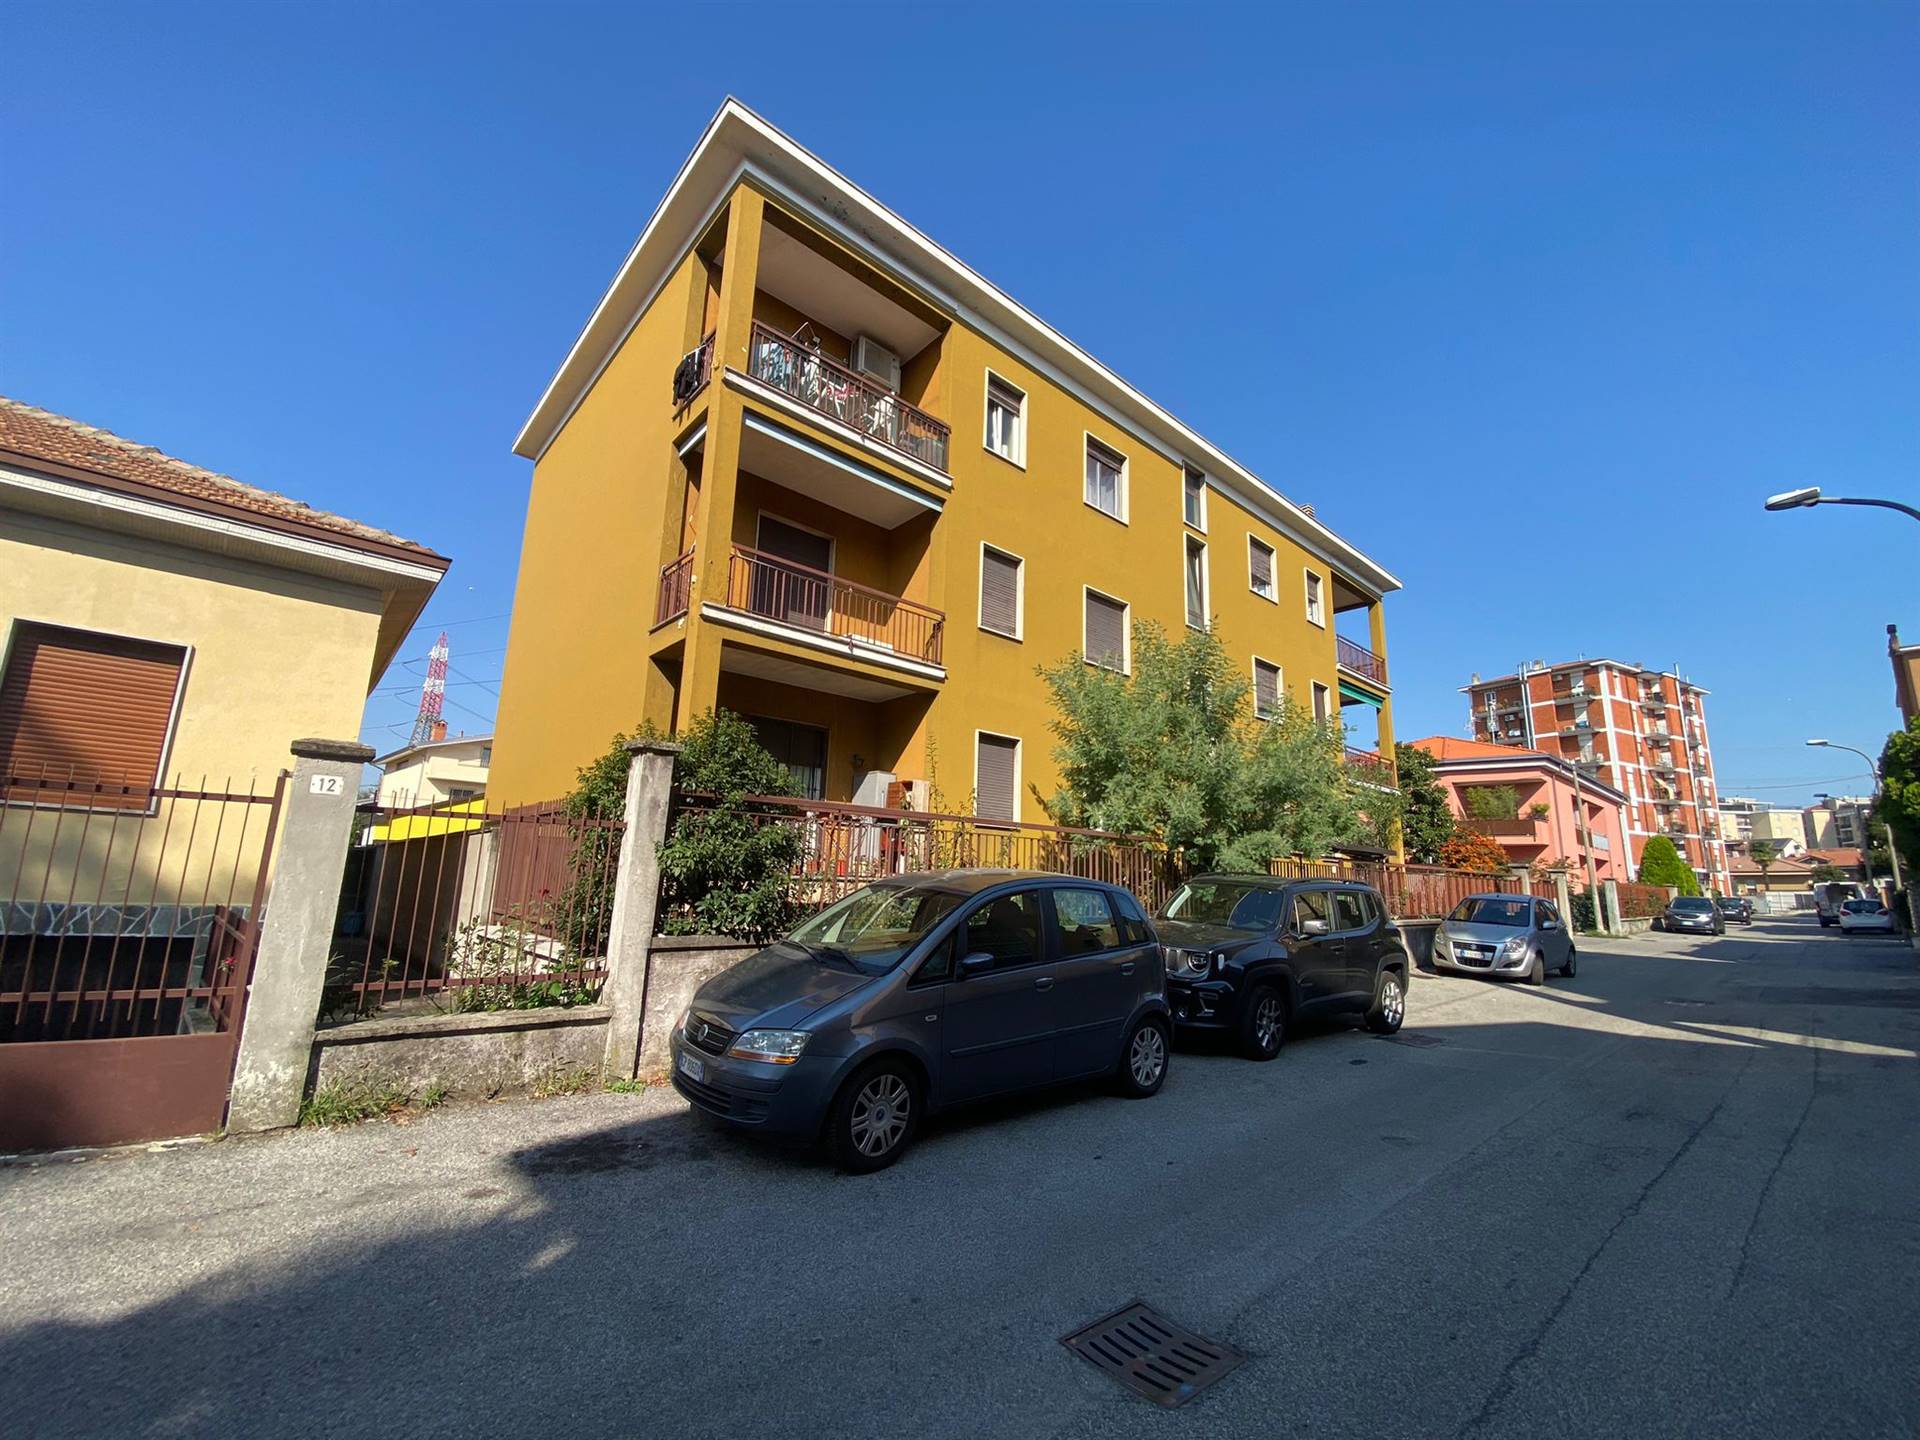 BRUGHERIO, Apartment for sale of 120 Sq. mt., Good condition, Heating Individual heating system, Energetic class: G, Epi: 300 kwh/m2 year, composed by: 4 Rooms, , 1 Bathroom, Price: € 1,000